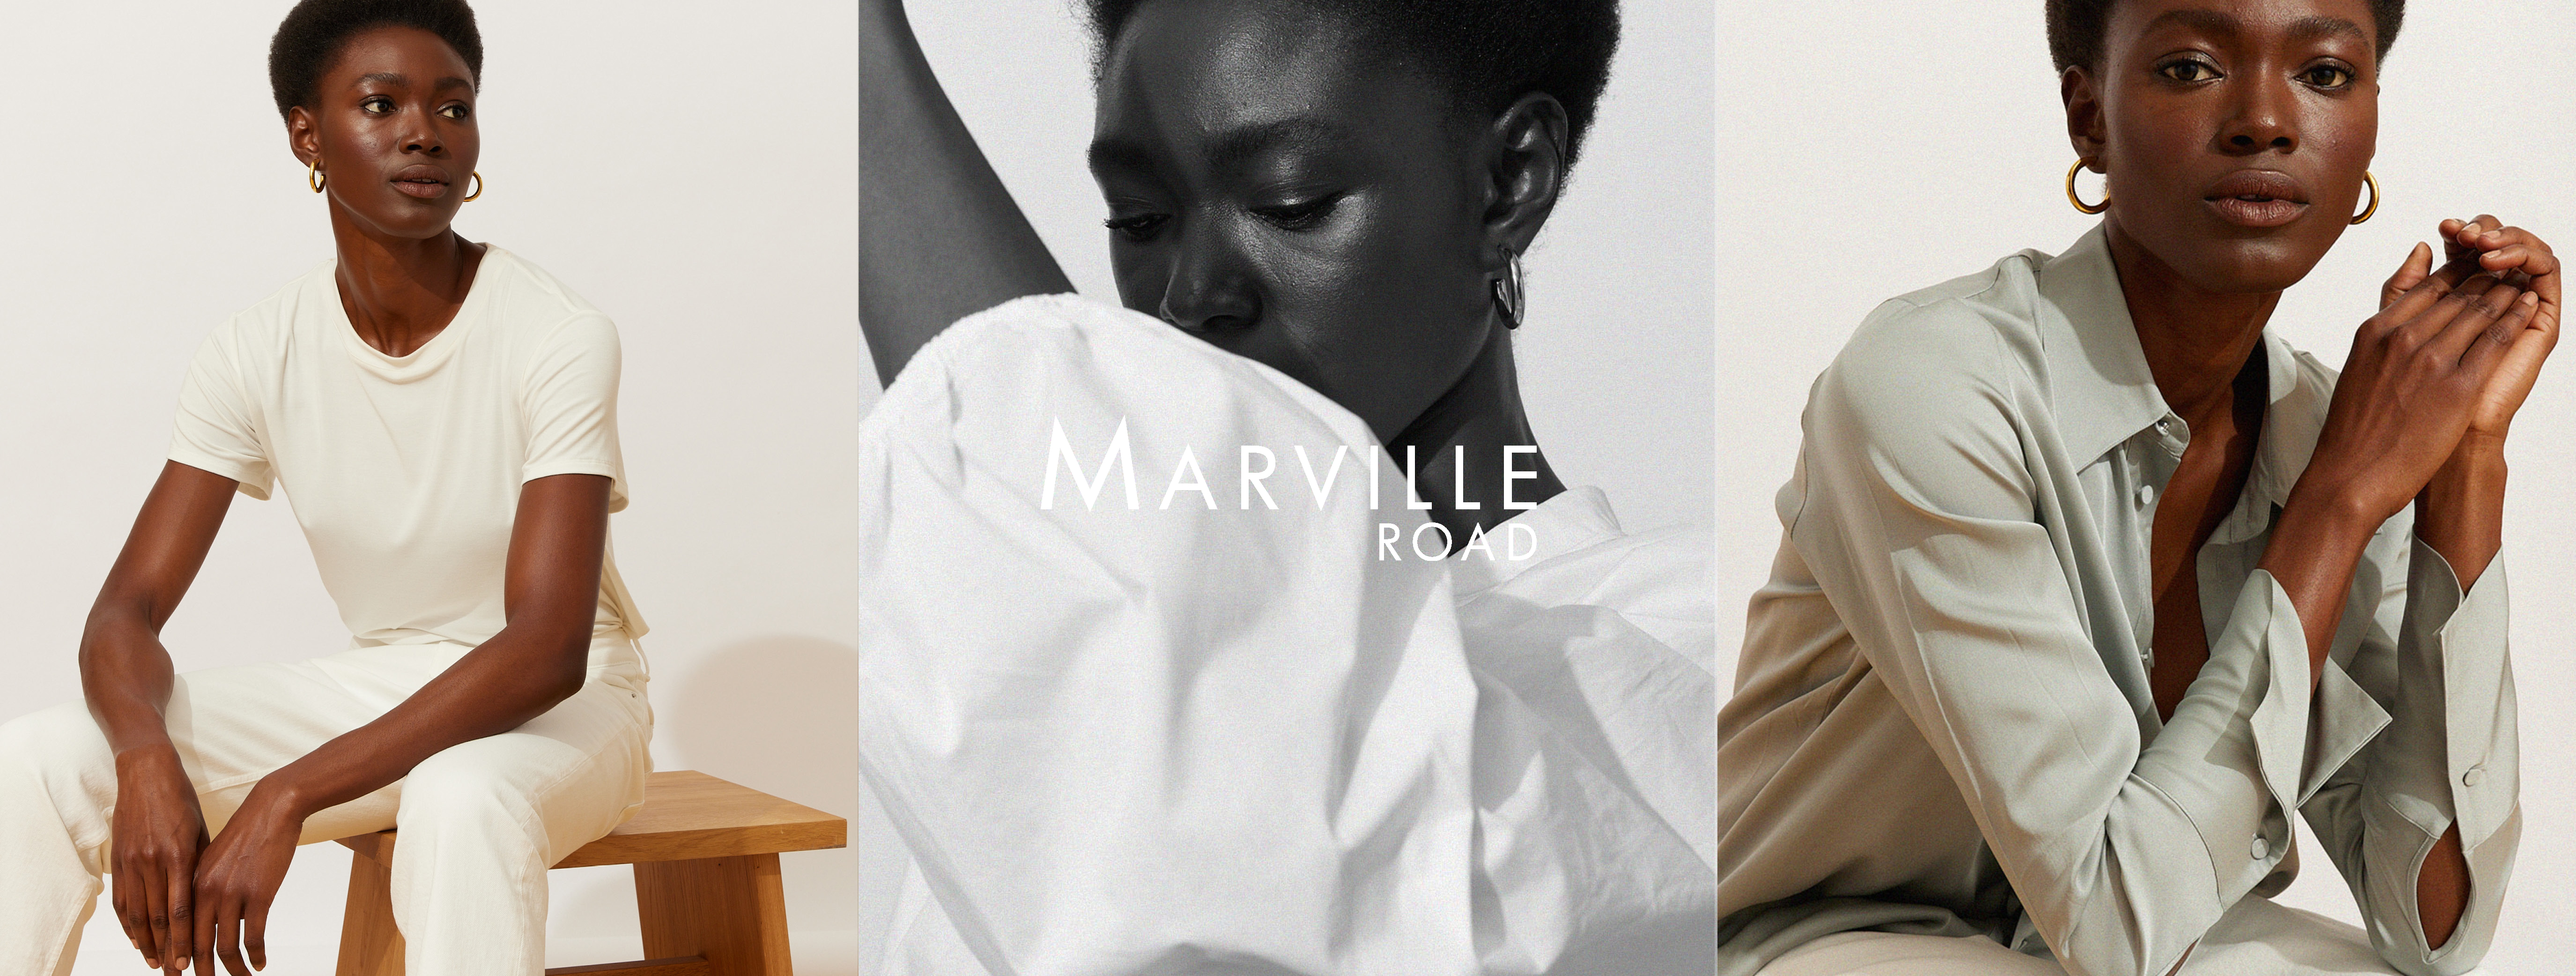 Marville Road Brand Page Banner #1